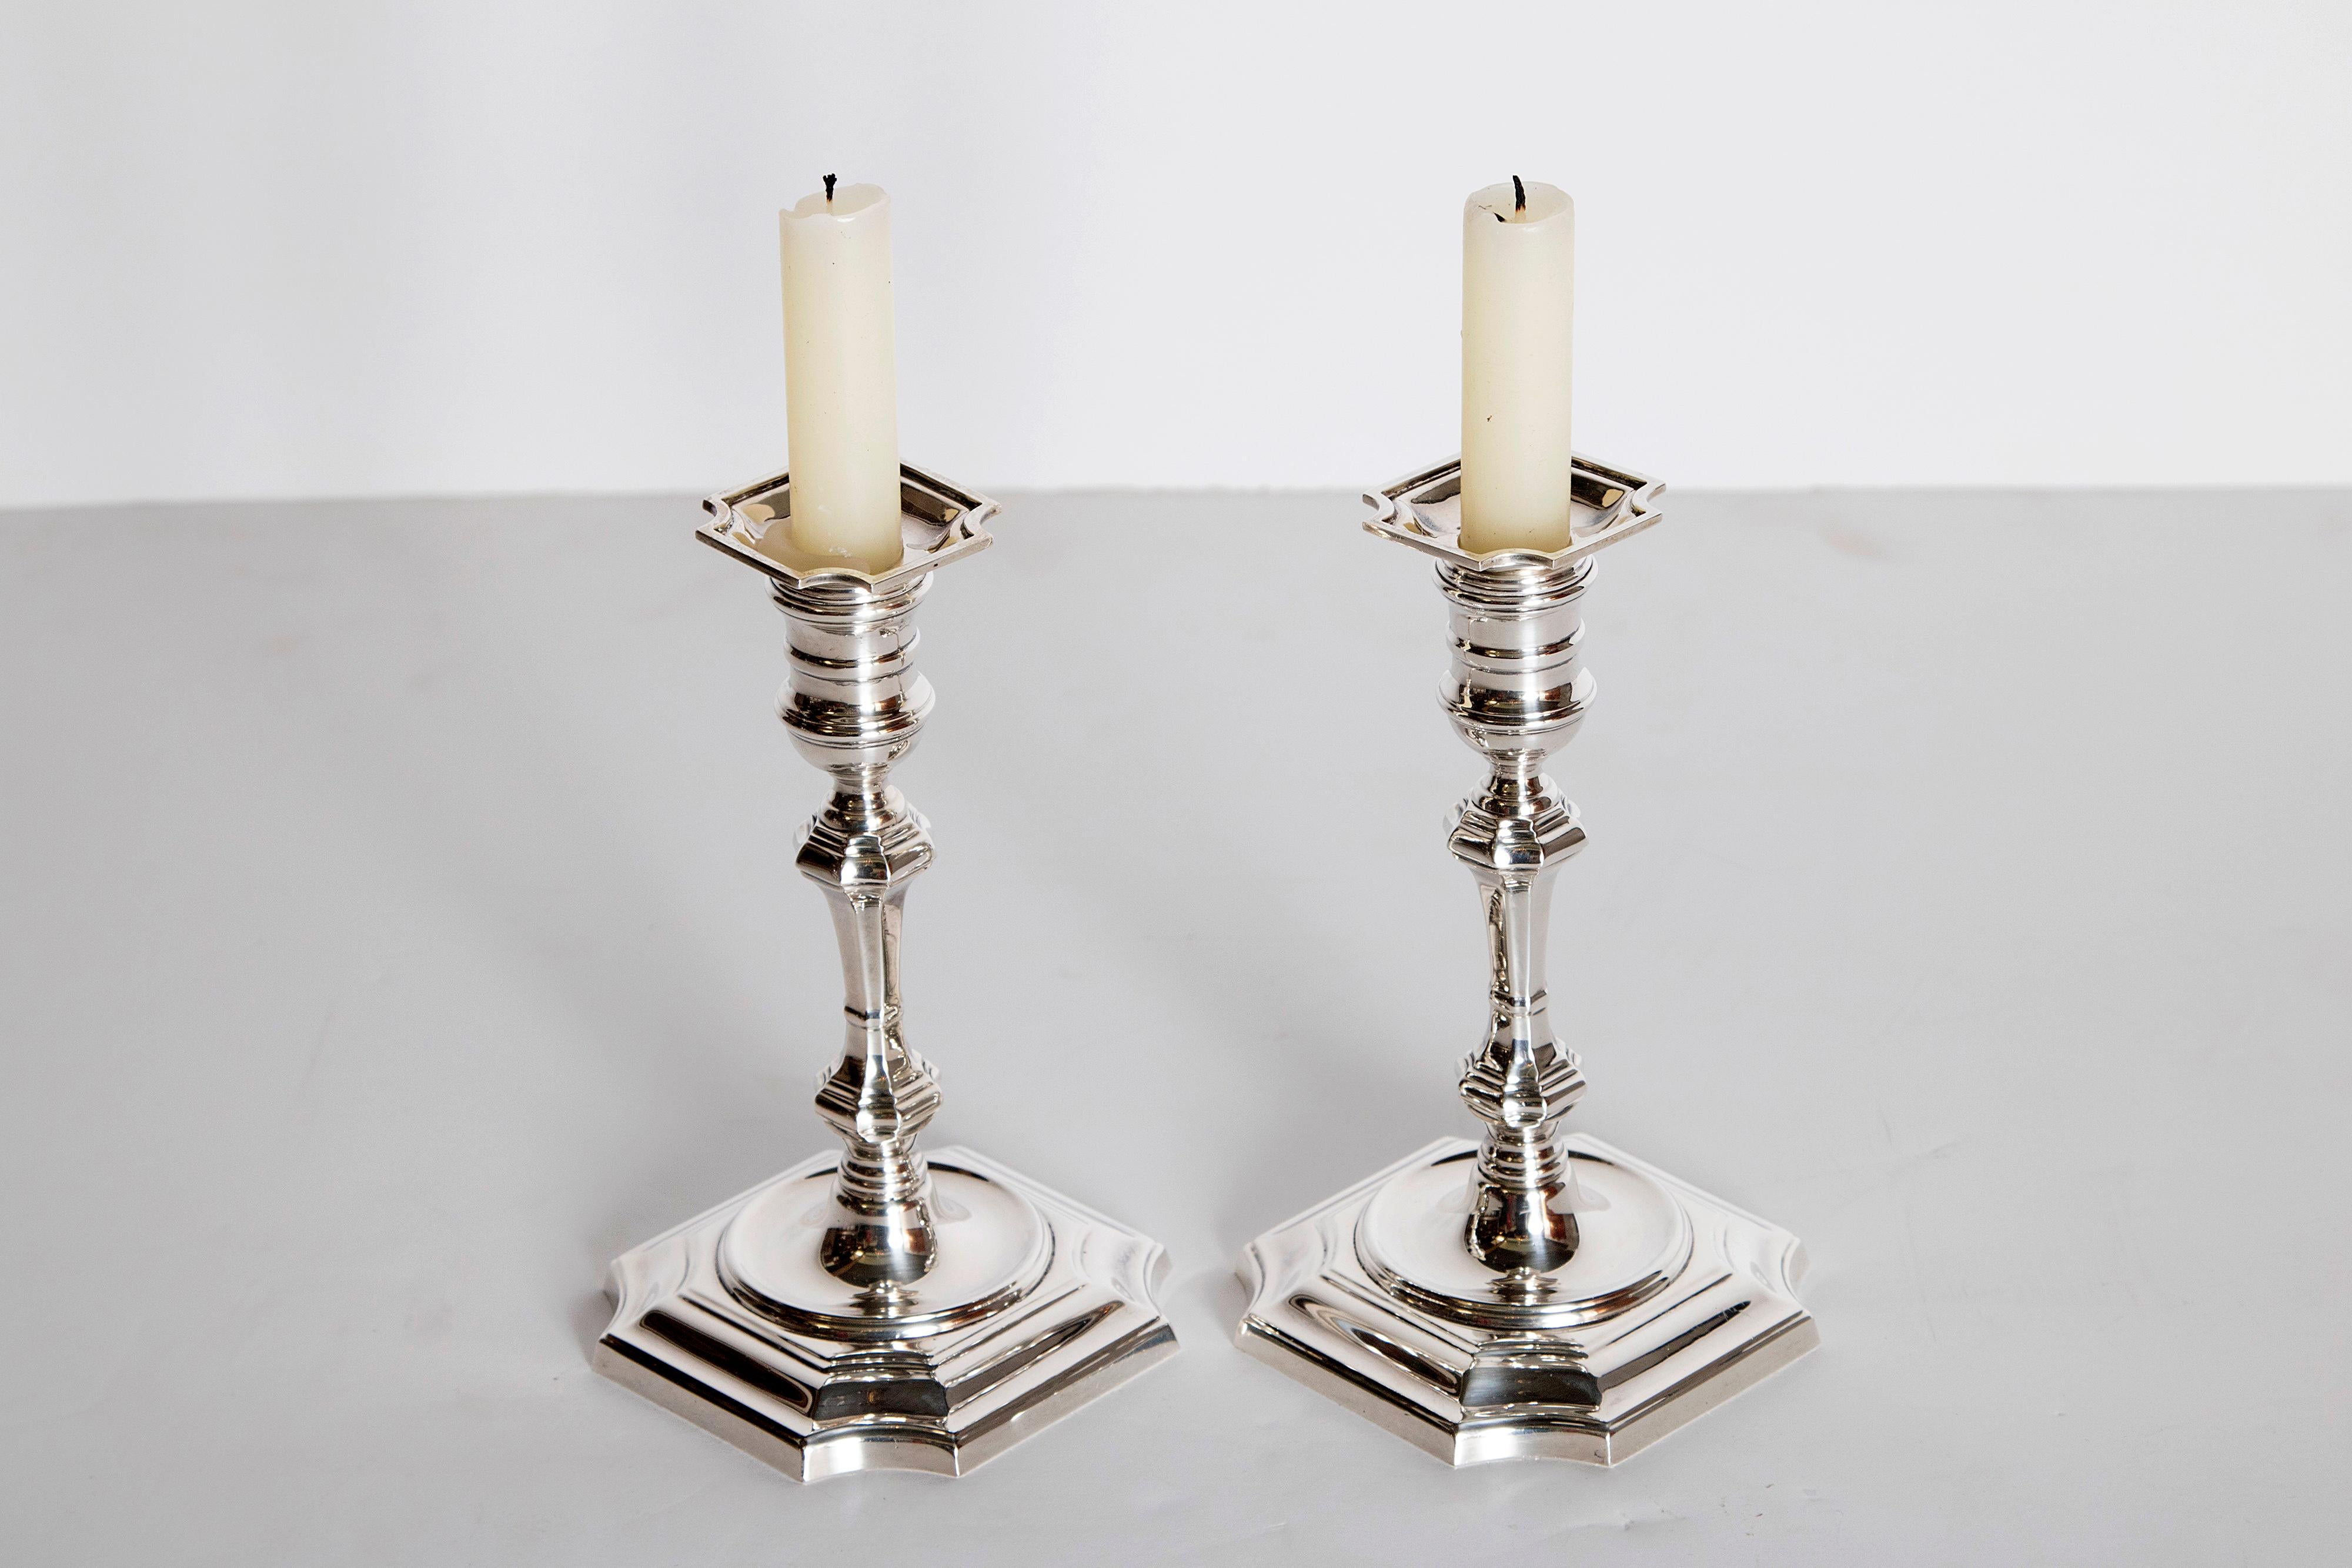 American Pair of George II Style Sterling Silver Candlesticks by Cartier